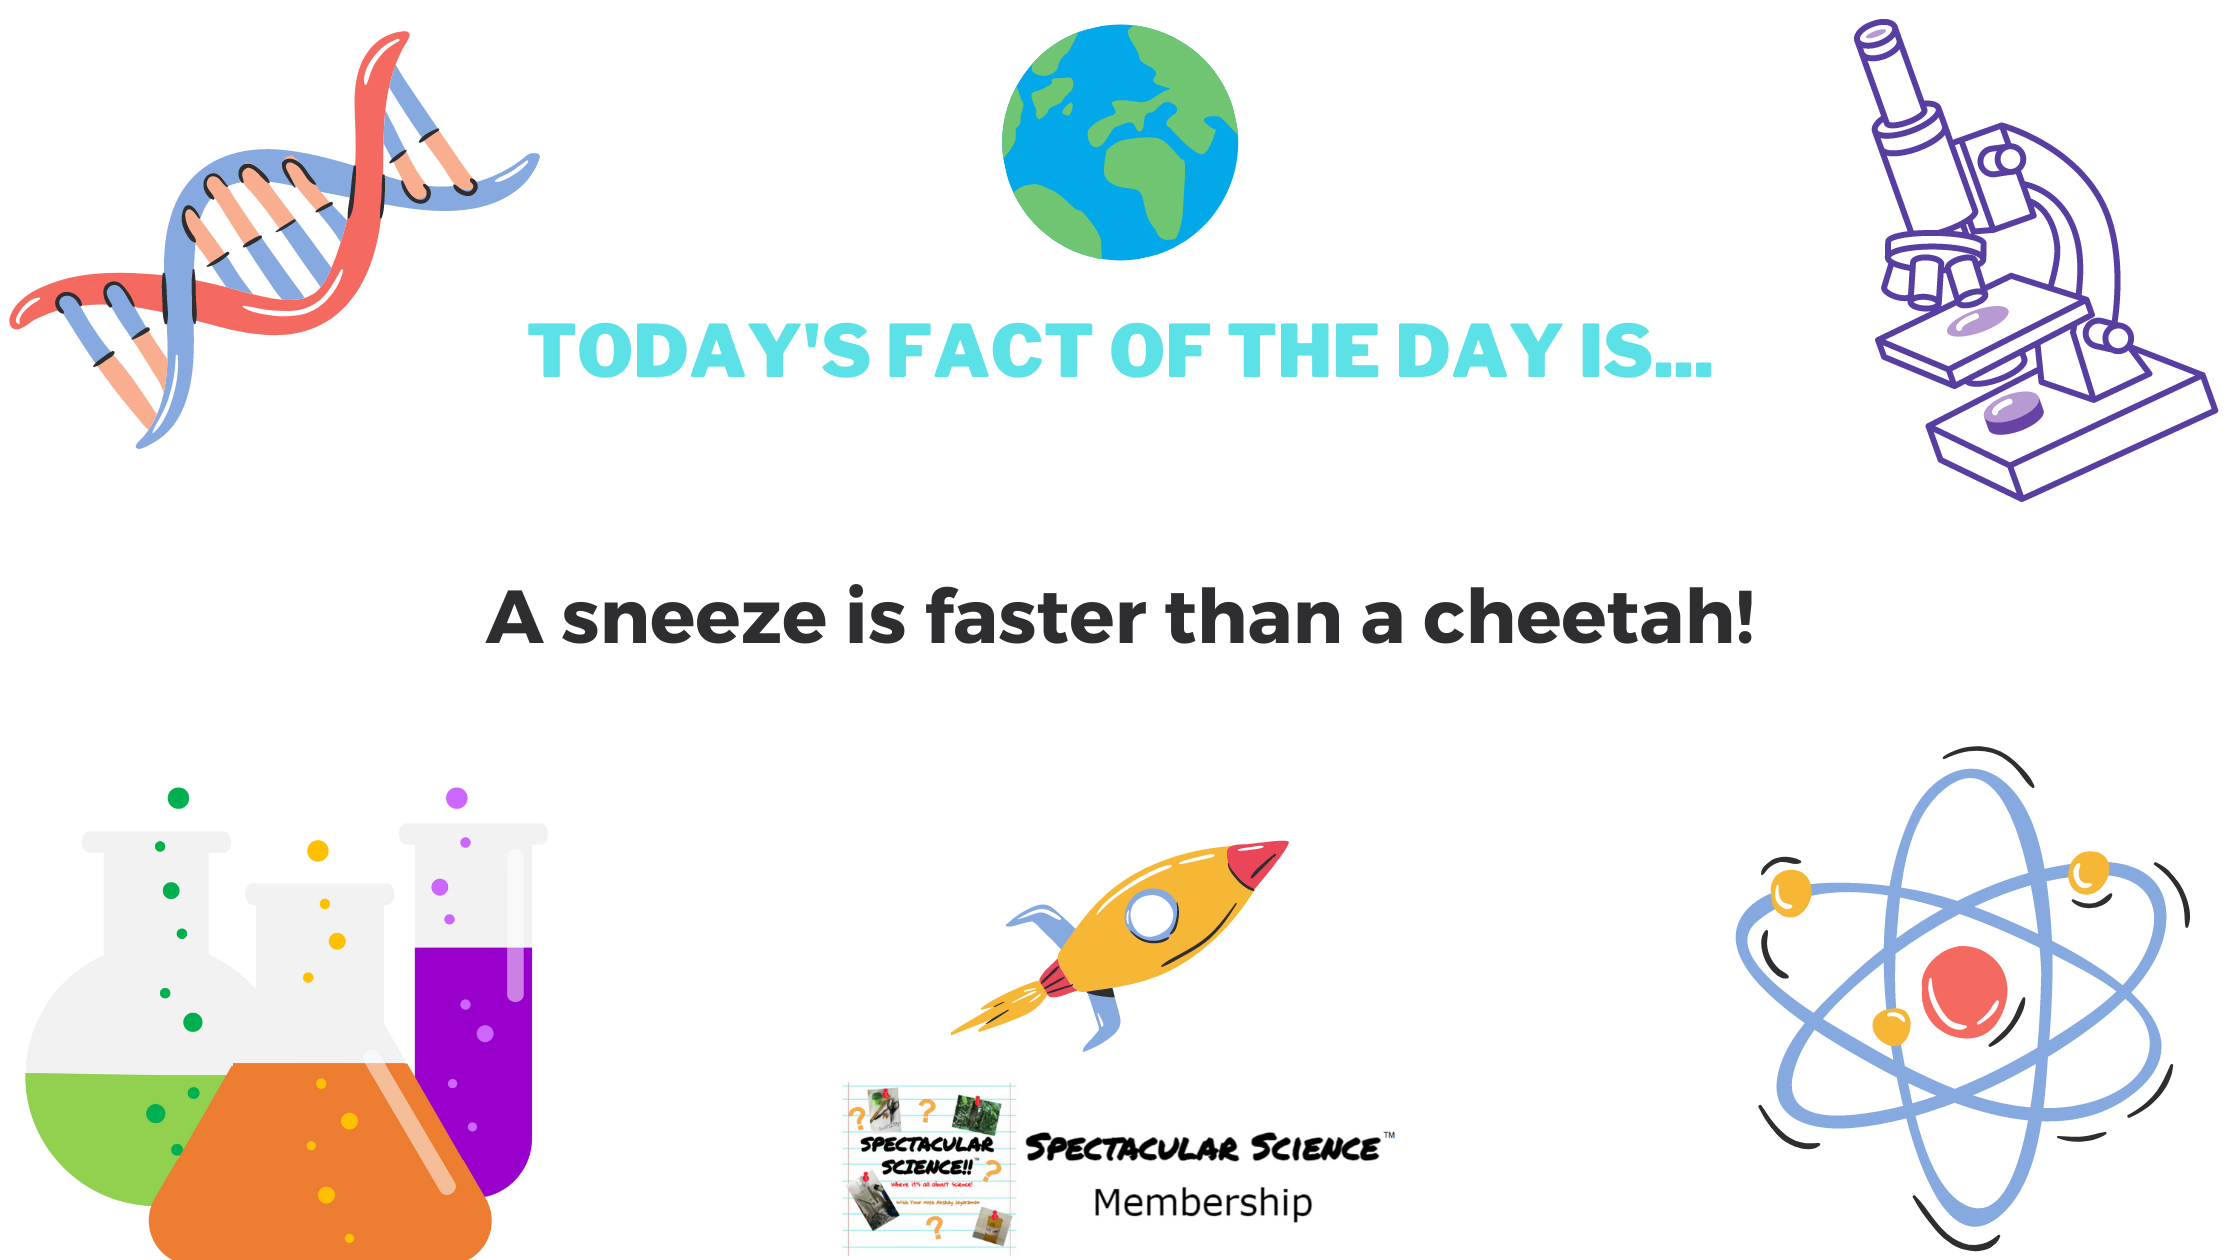 Fact of the Day Image Apr. 18th